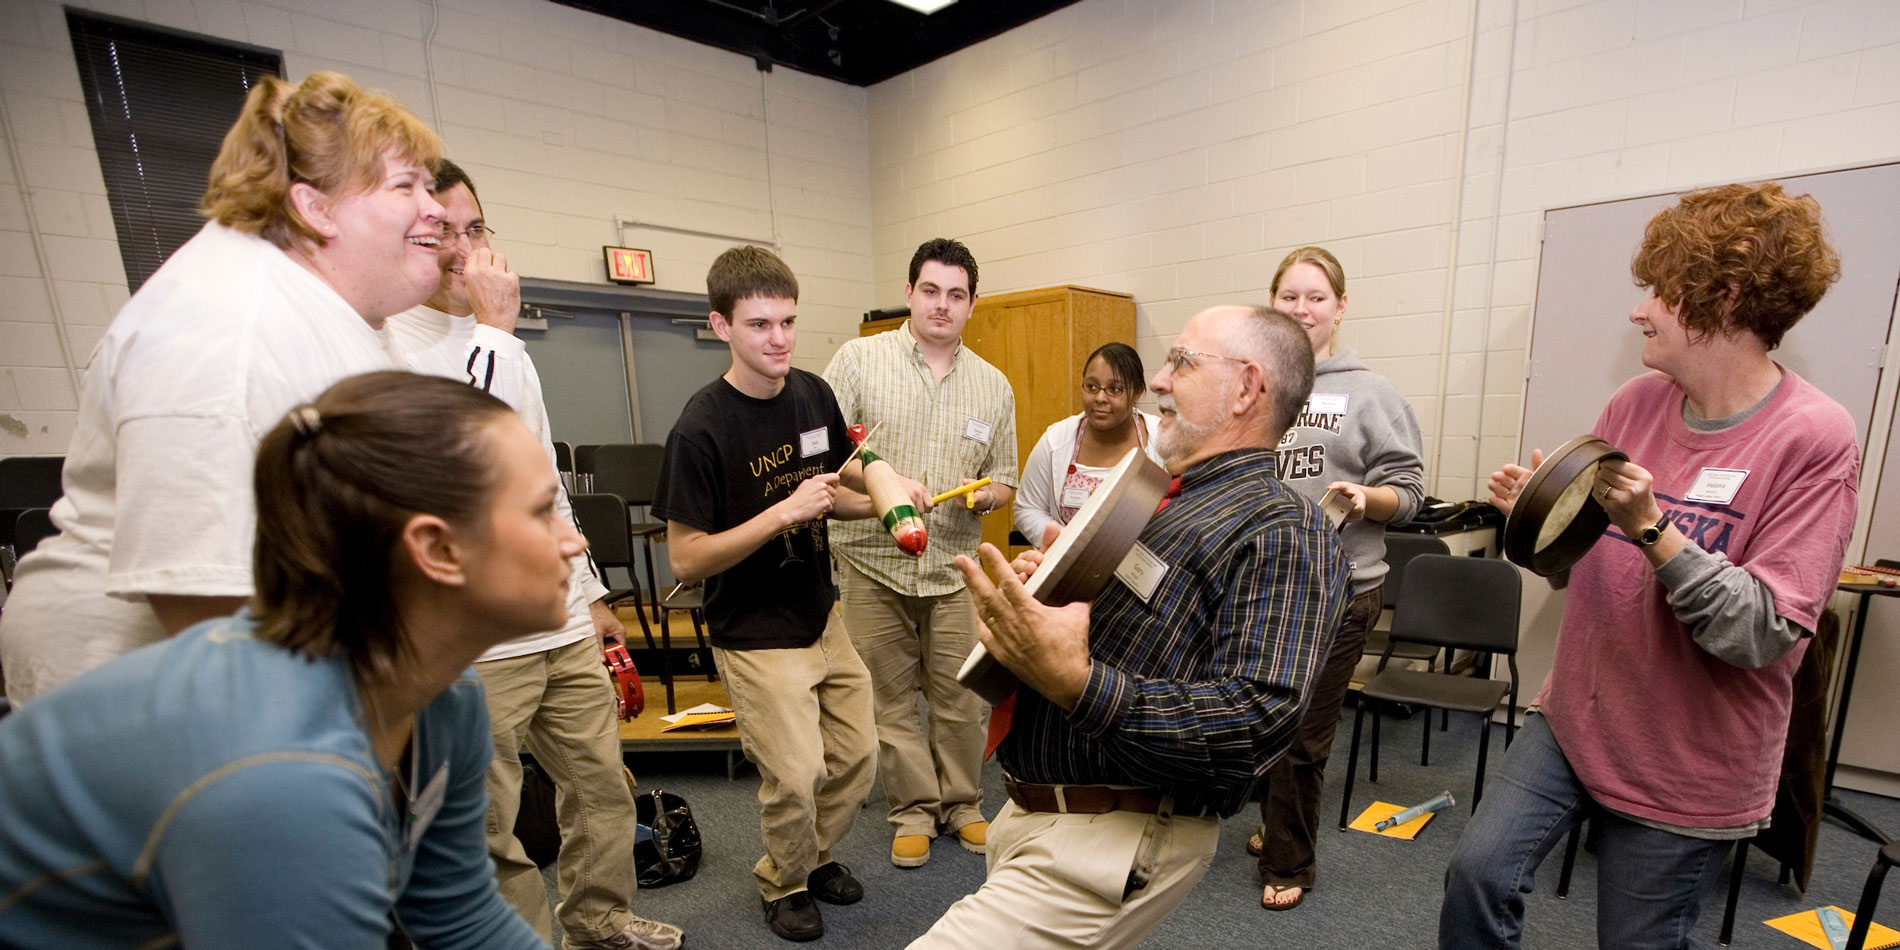 Group photo of music students hitting a drum